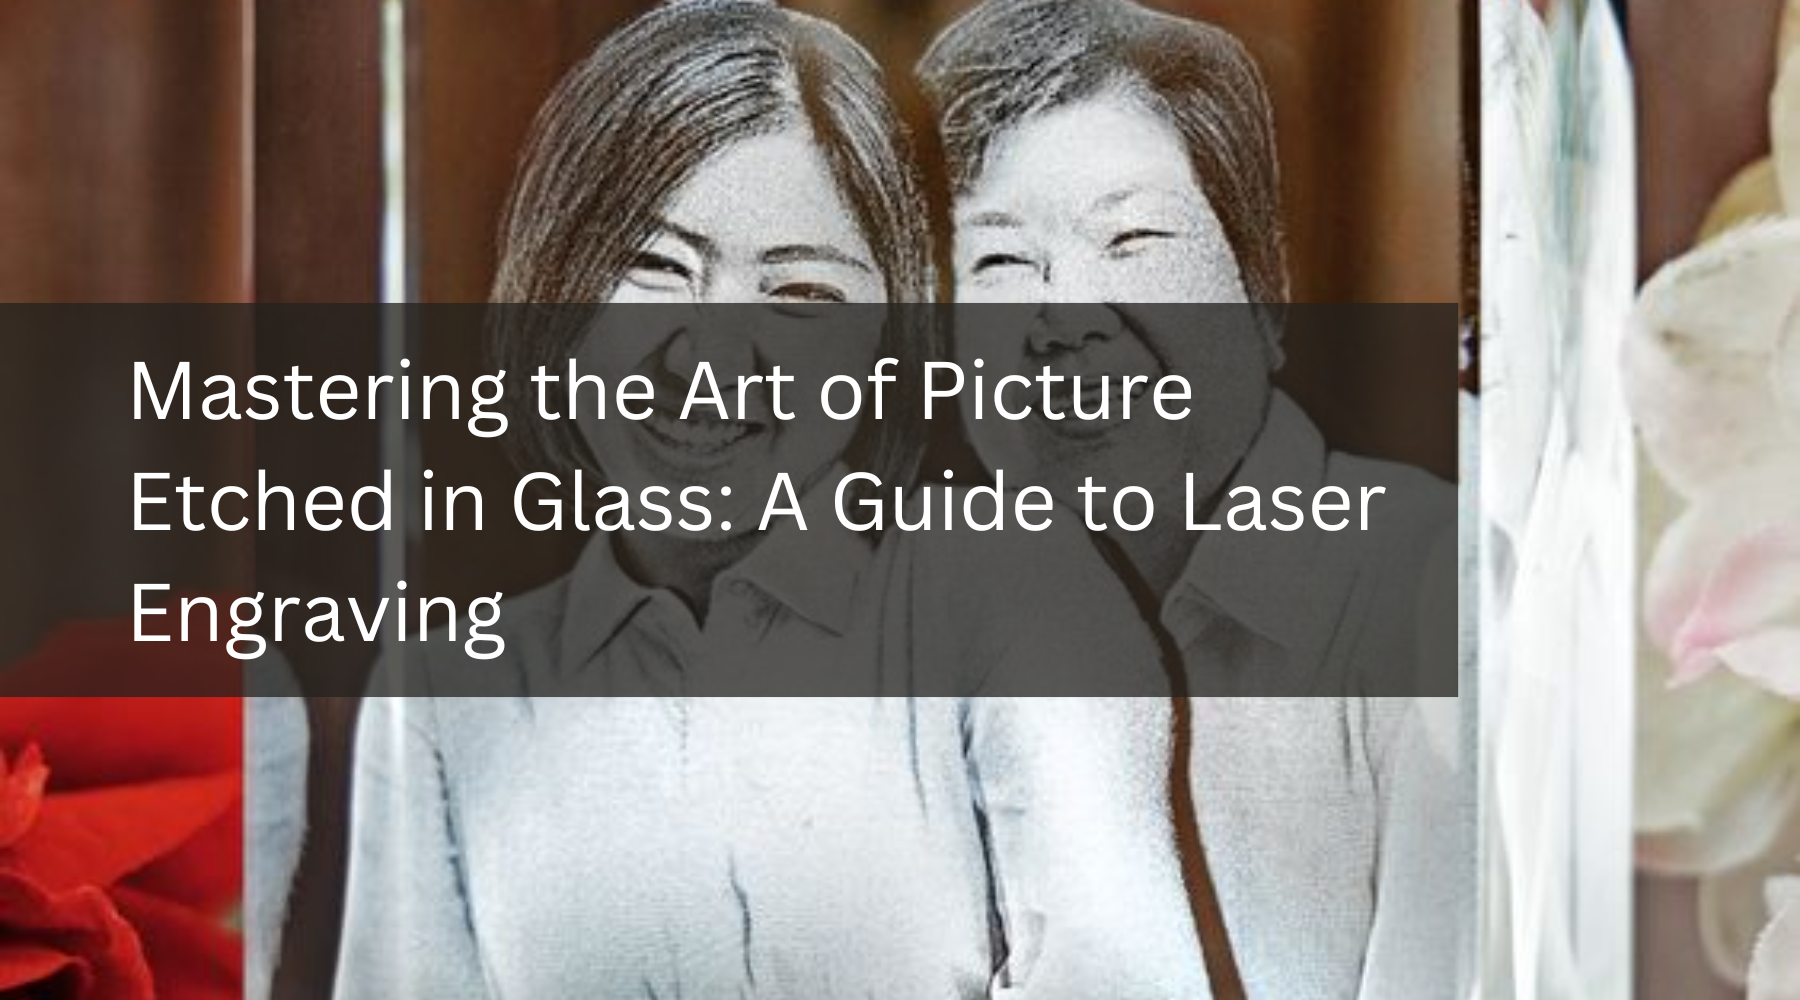 Mastering the Art of Picture Etched in Glass: A Guide to Laser Engraving